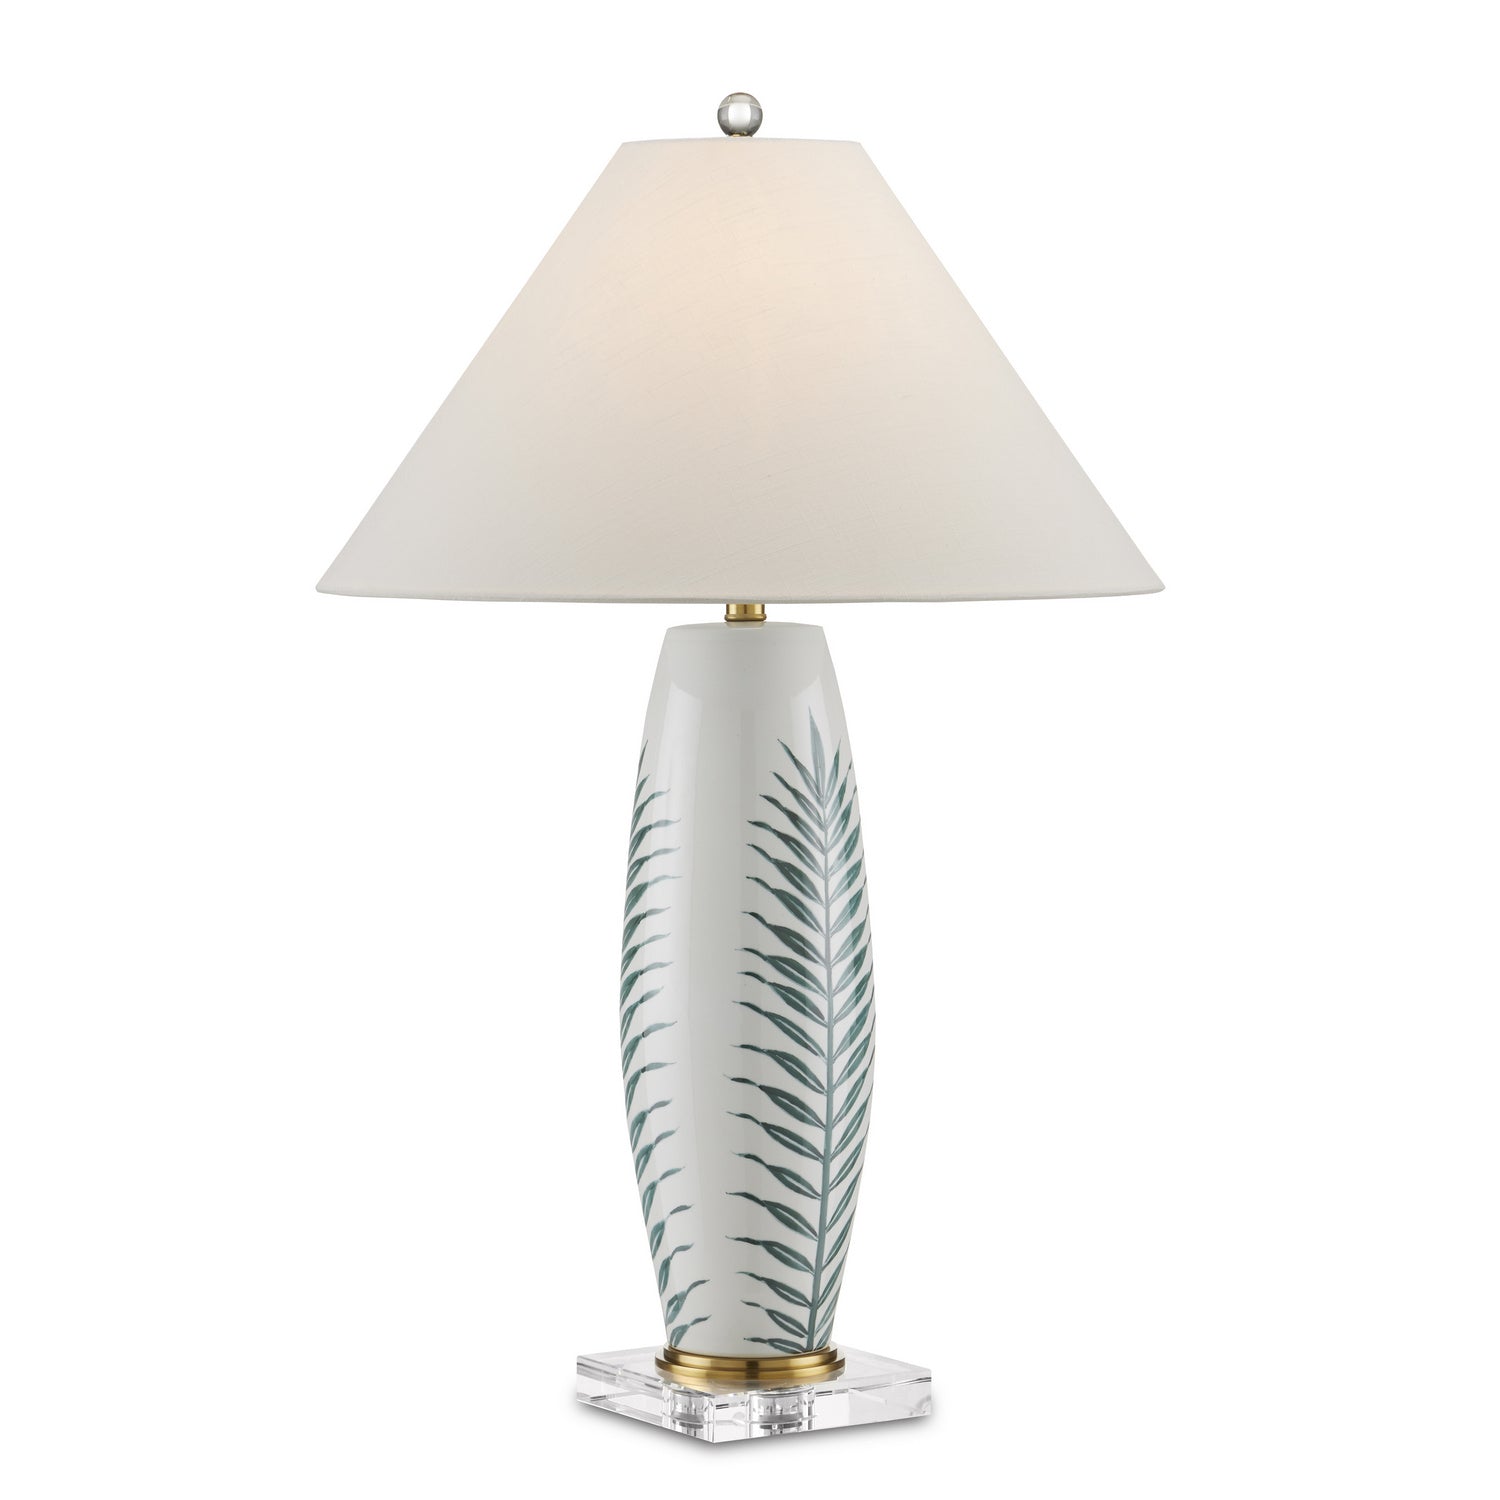 Currey and Company - 6000-0843 - One Light Table Lamp - Kenita - White/Green/Clear/Polished Brass